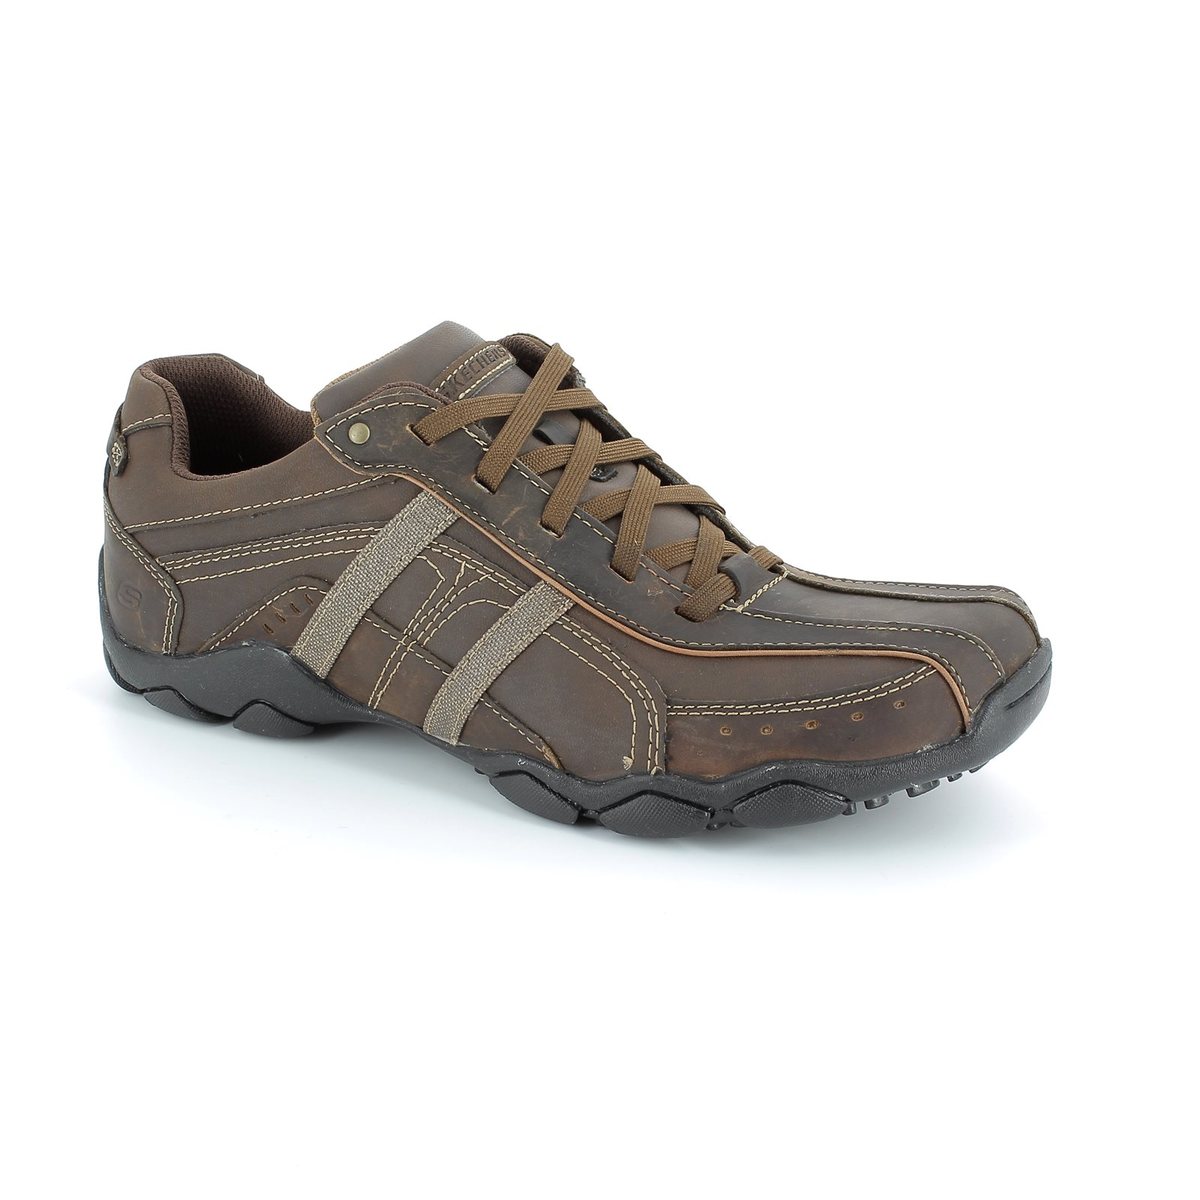 Skechers Murilo Diameter CDB Brown Mens comfort shoes 64276 in a Plain Leather in Size 8.5